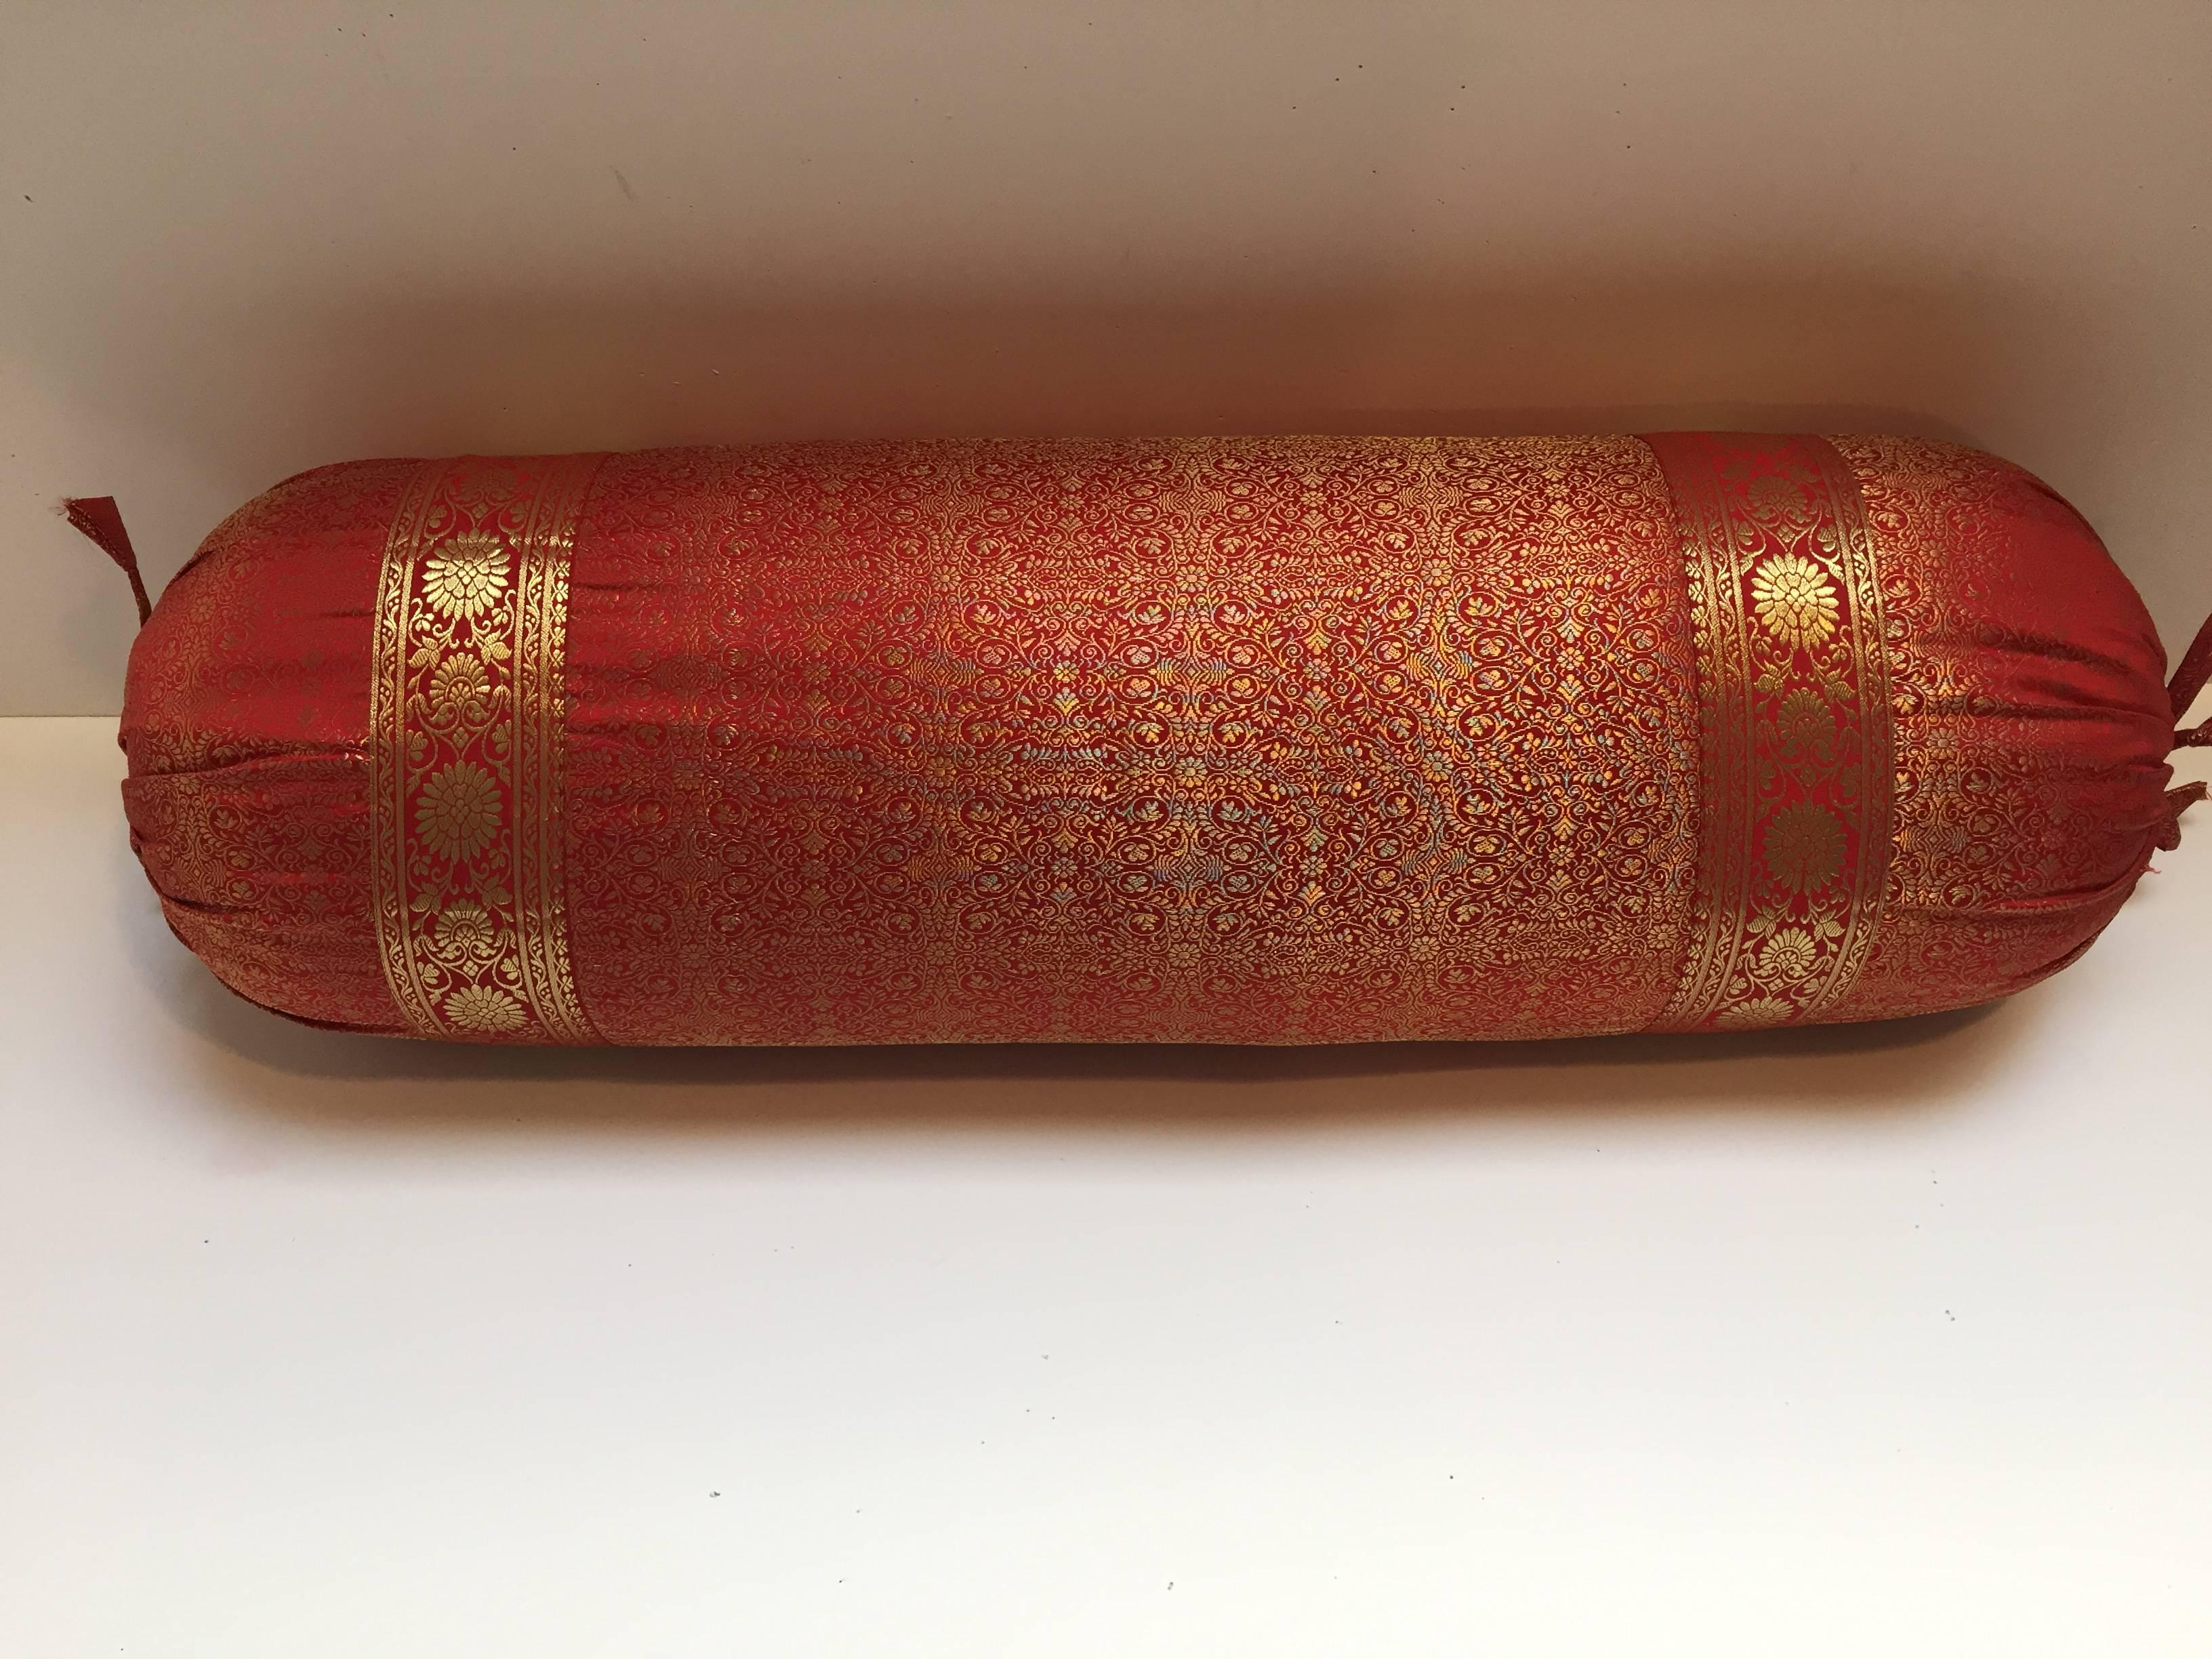 Custom-made pair of silk bolster pillows made from vintage wedding silk saris in red and gold colors.
Very large size: 30 inches long x 9.5 inches diameter.